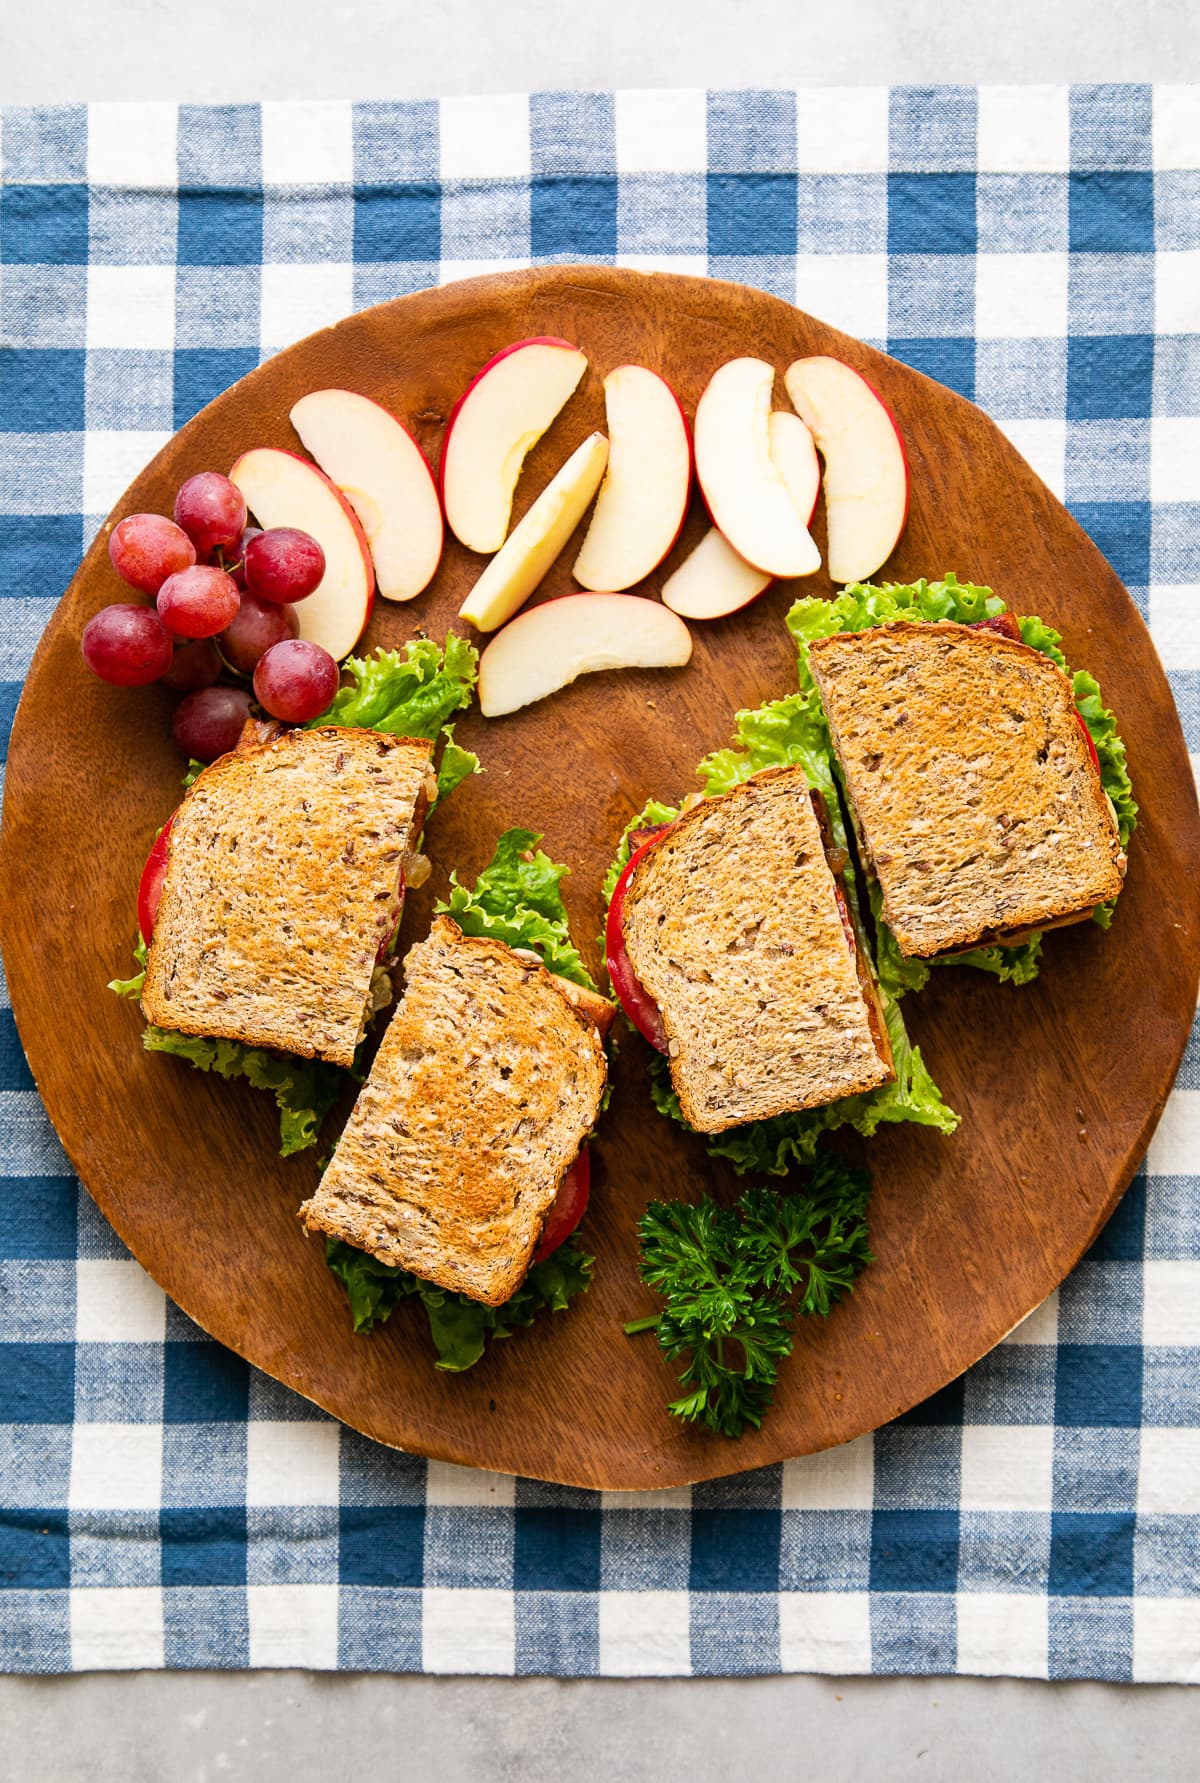 top down view of tofu sandwiches sliced in half on wooden tray with fruit.